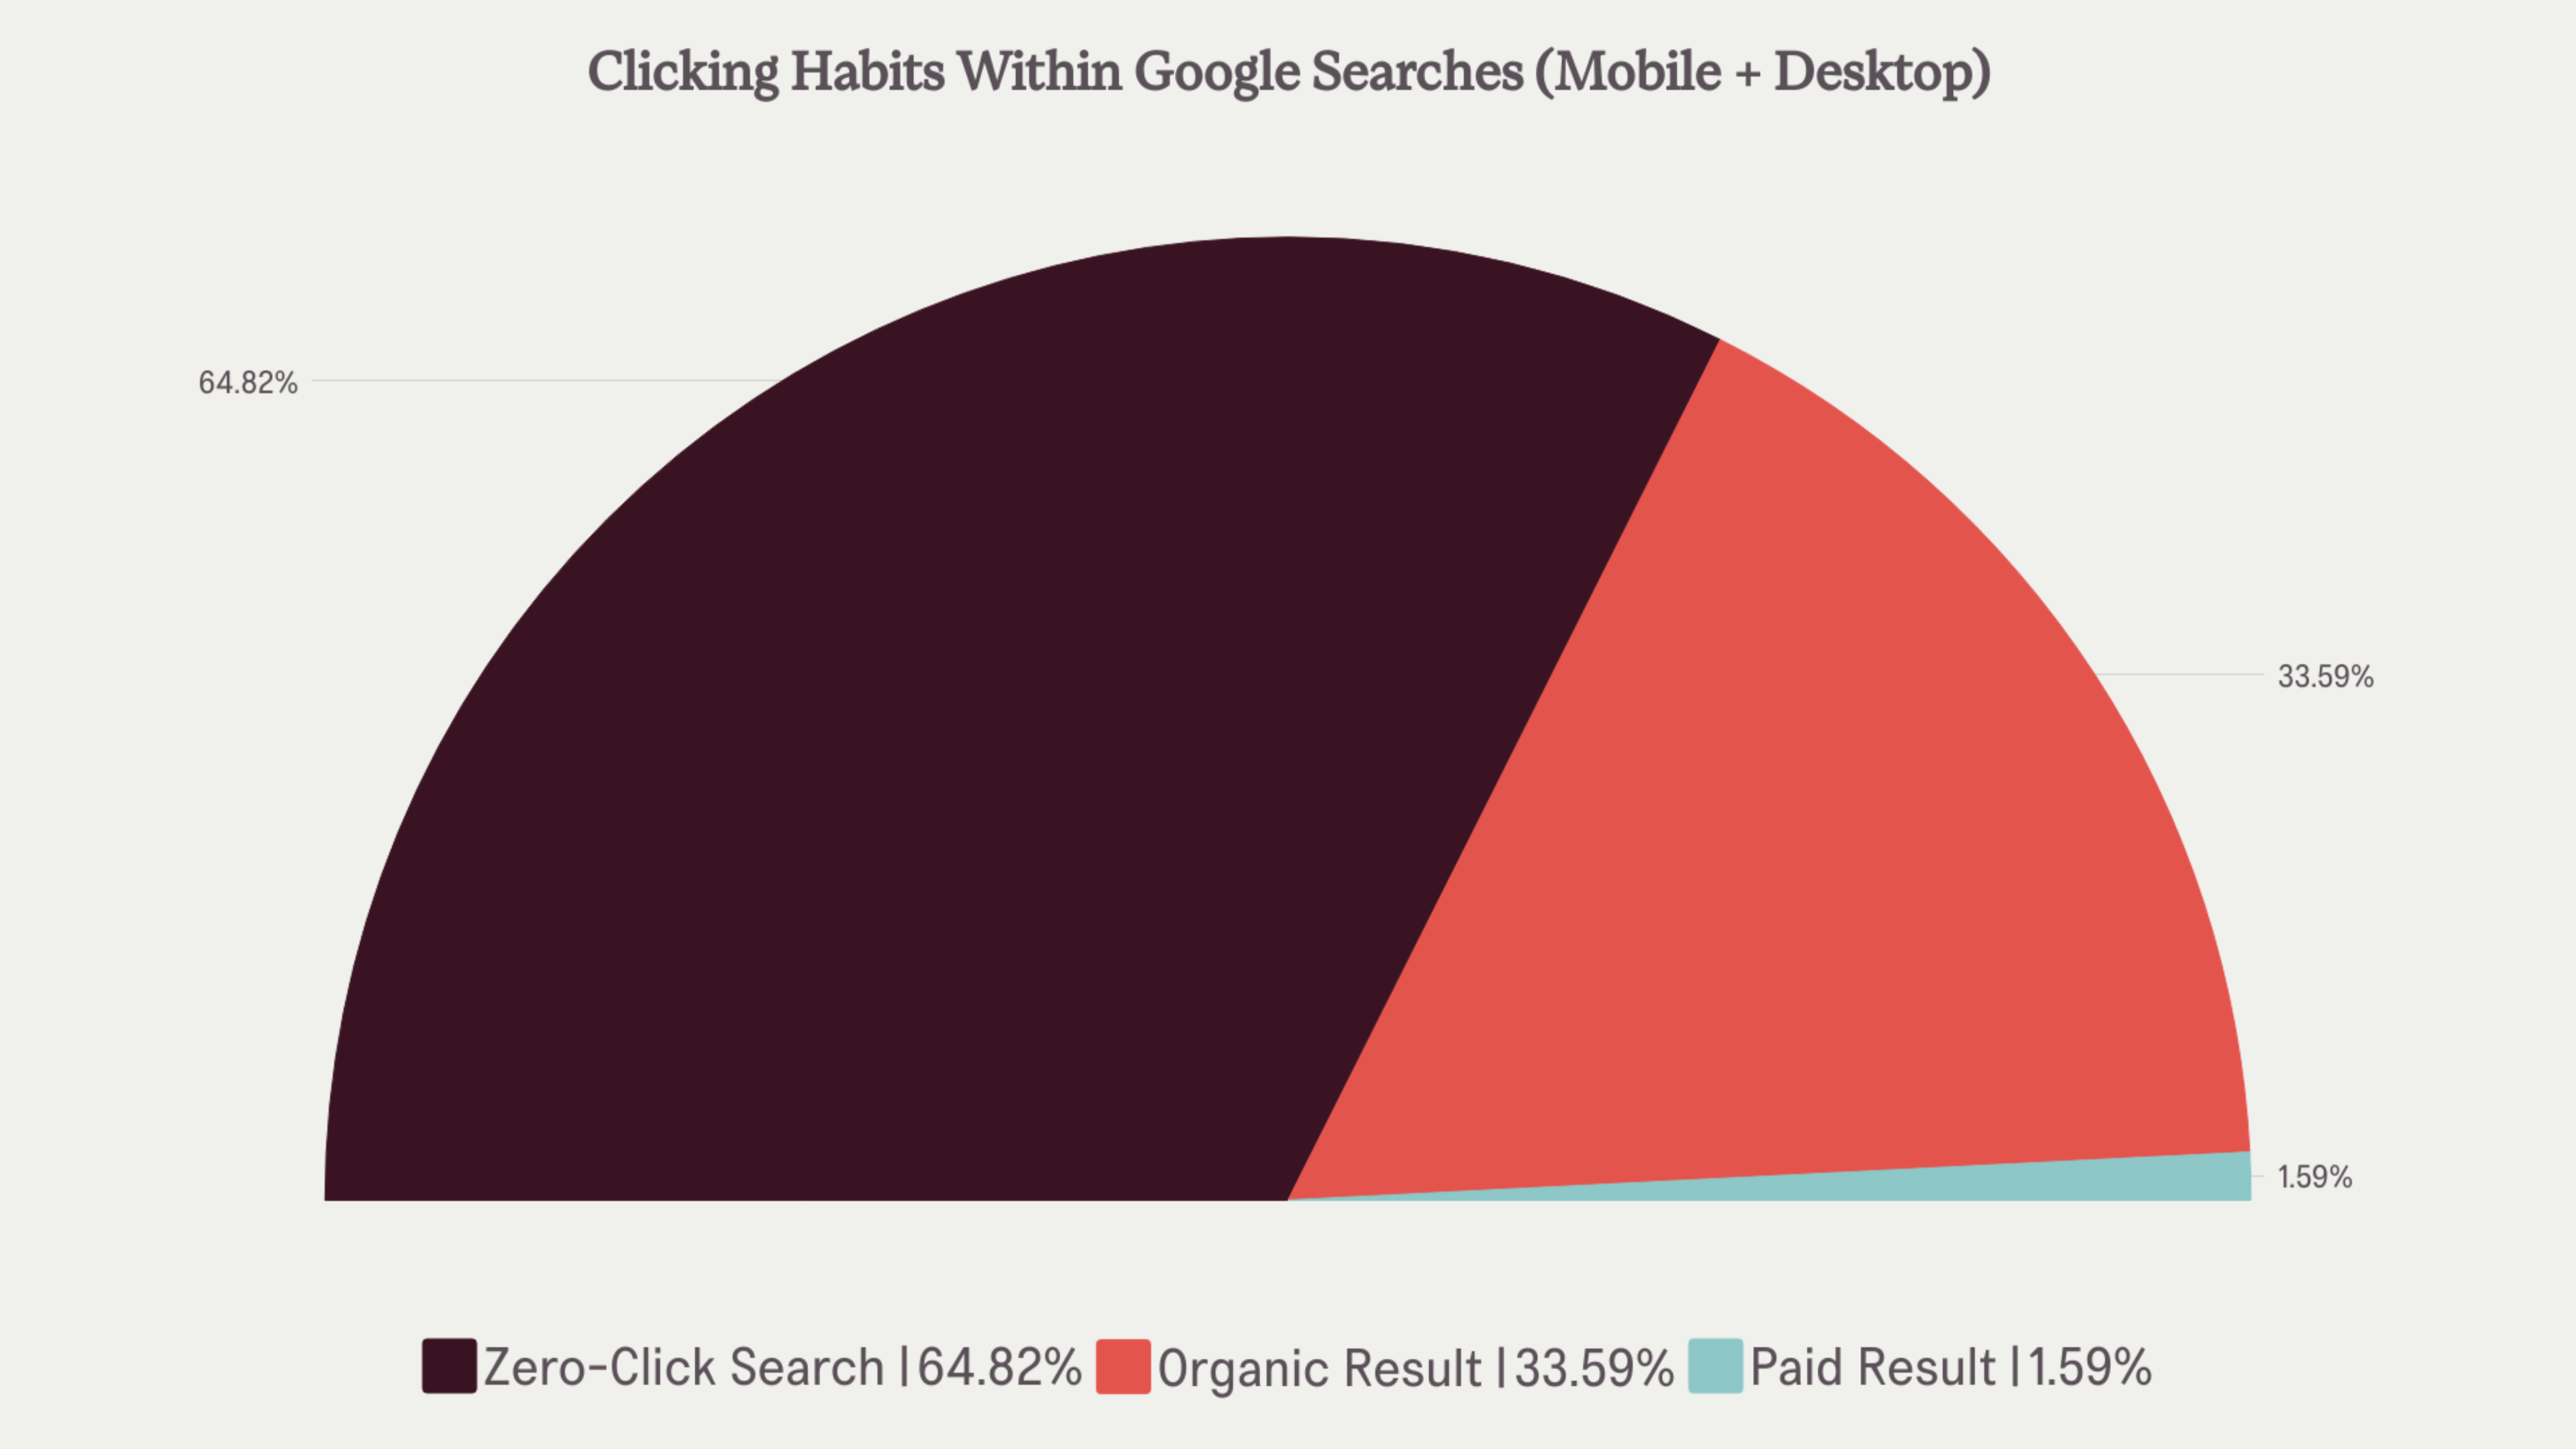 seo stat showing click habits within Google searches